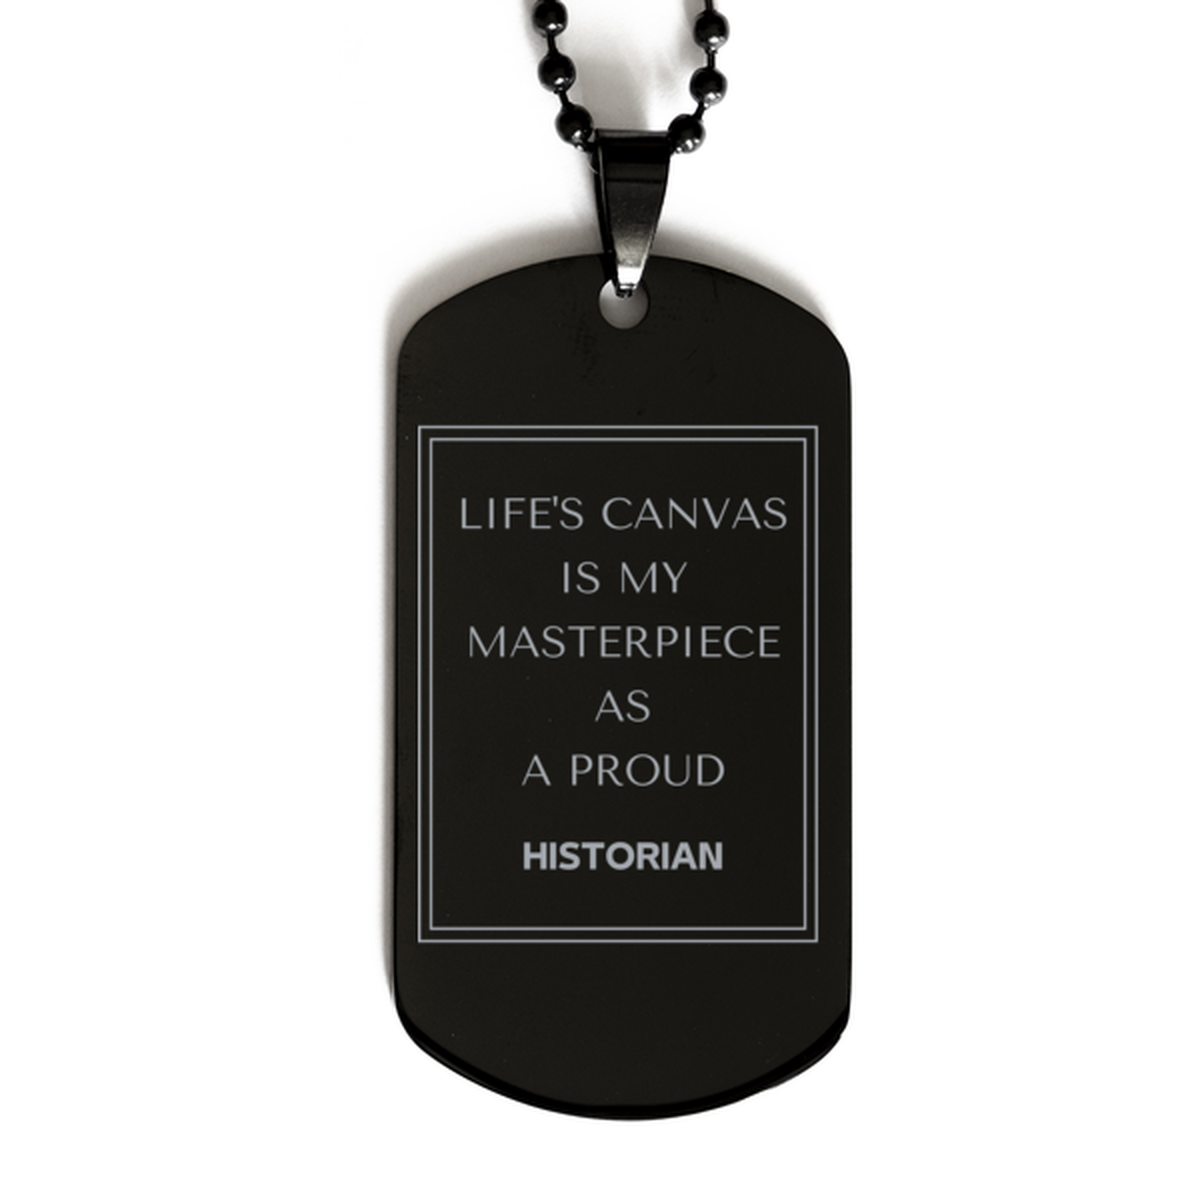 Proud Historian Gifts, Life's canvas is my masterpiece, Epic Birthday Christmas Unique Black Dog Tag For Historian, Coworkers, Men, Women, Friends